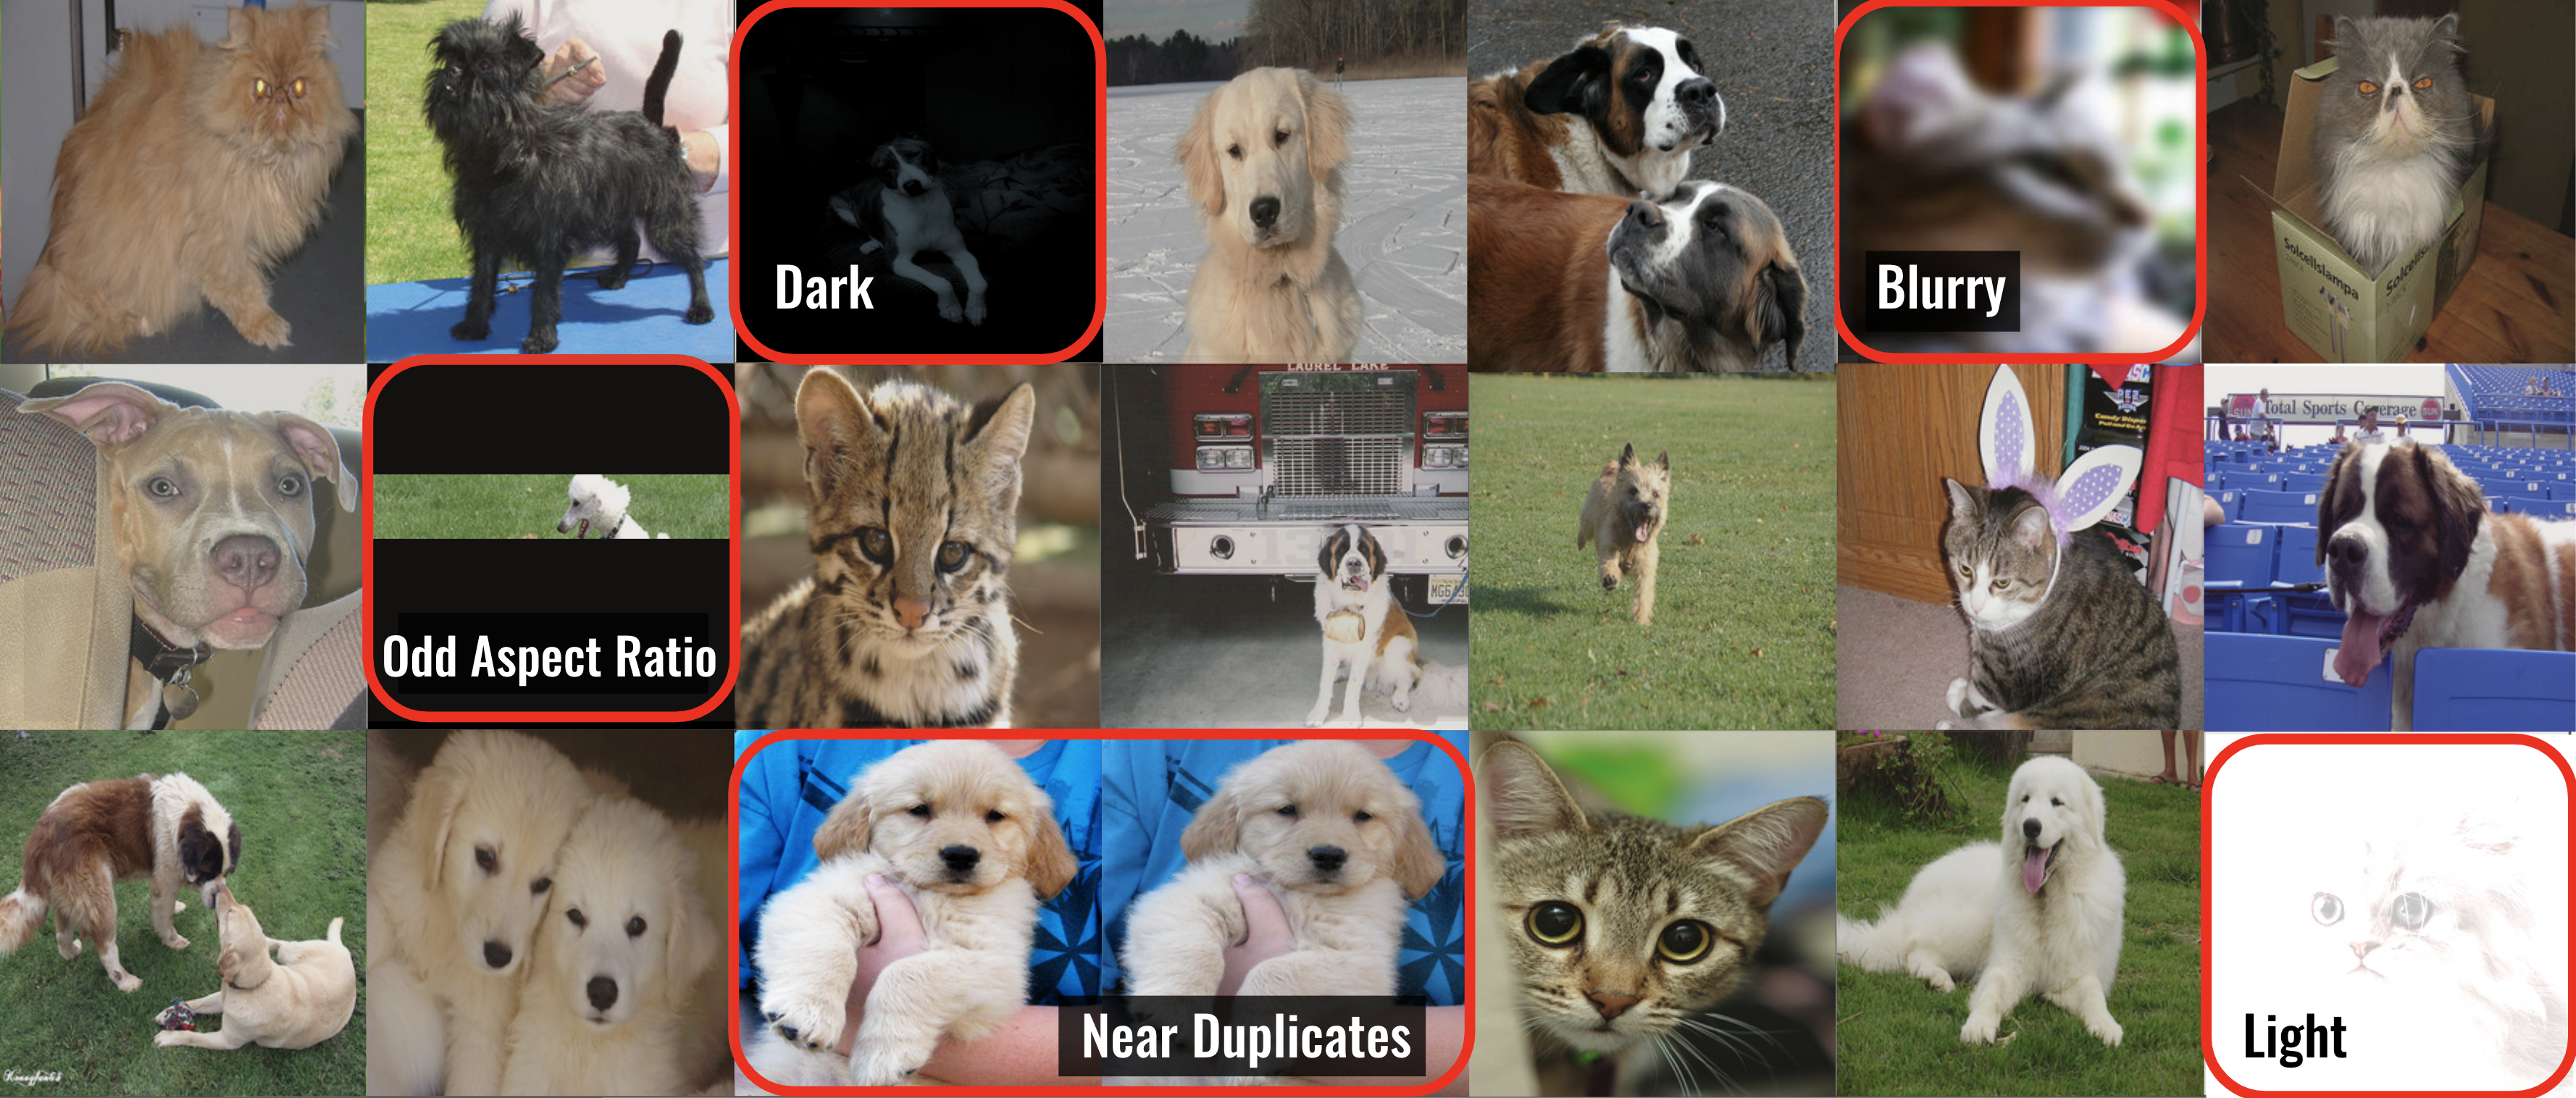 Issues detected in cat/dog dataset